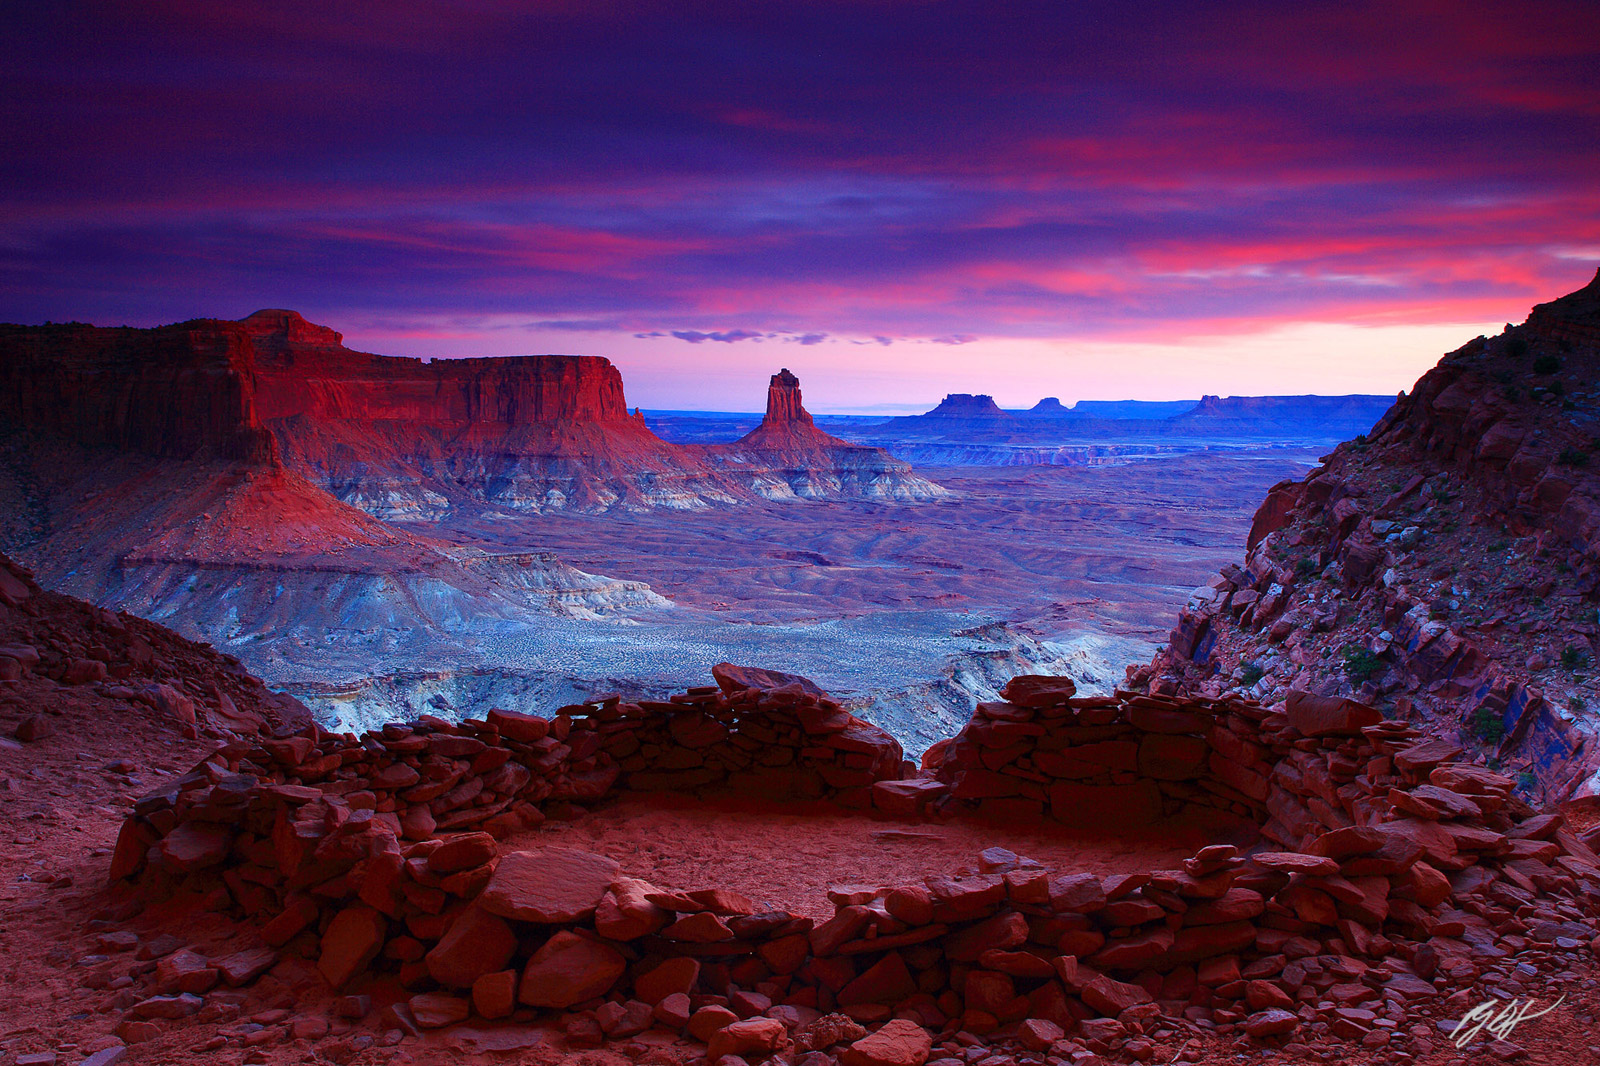 Sunset and the False Kica in Canyon Lands National Park in Utah